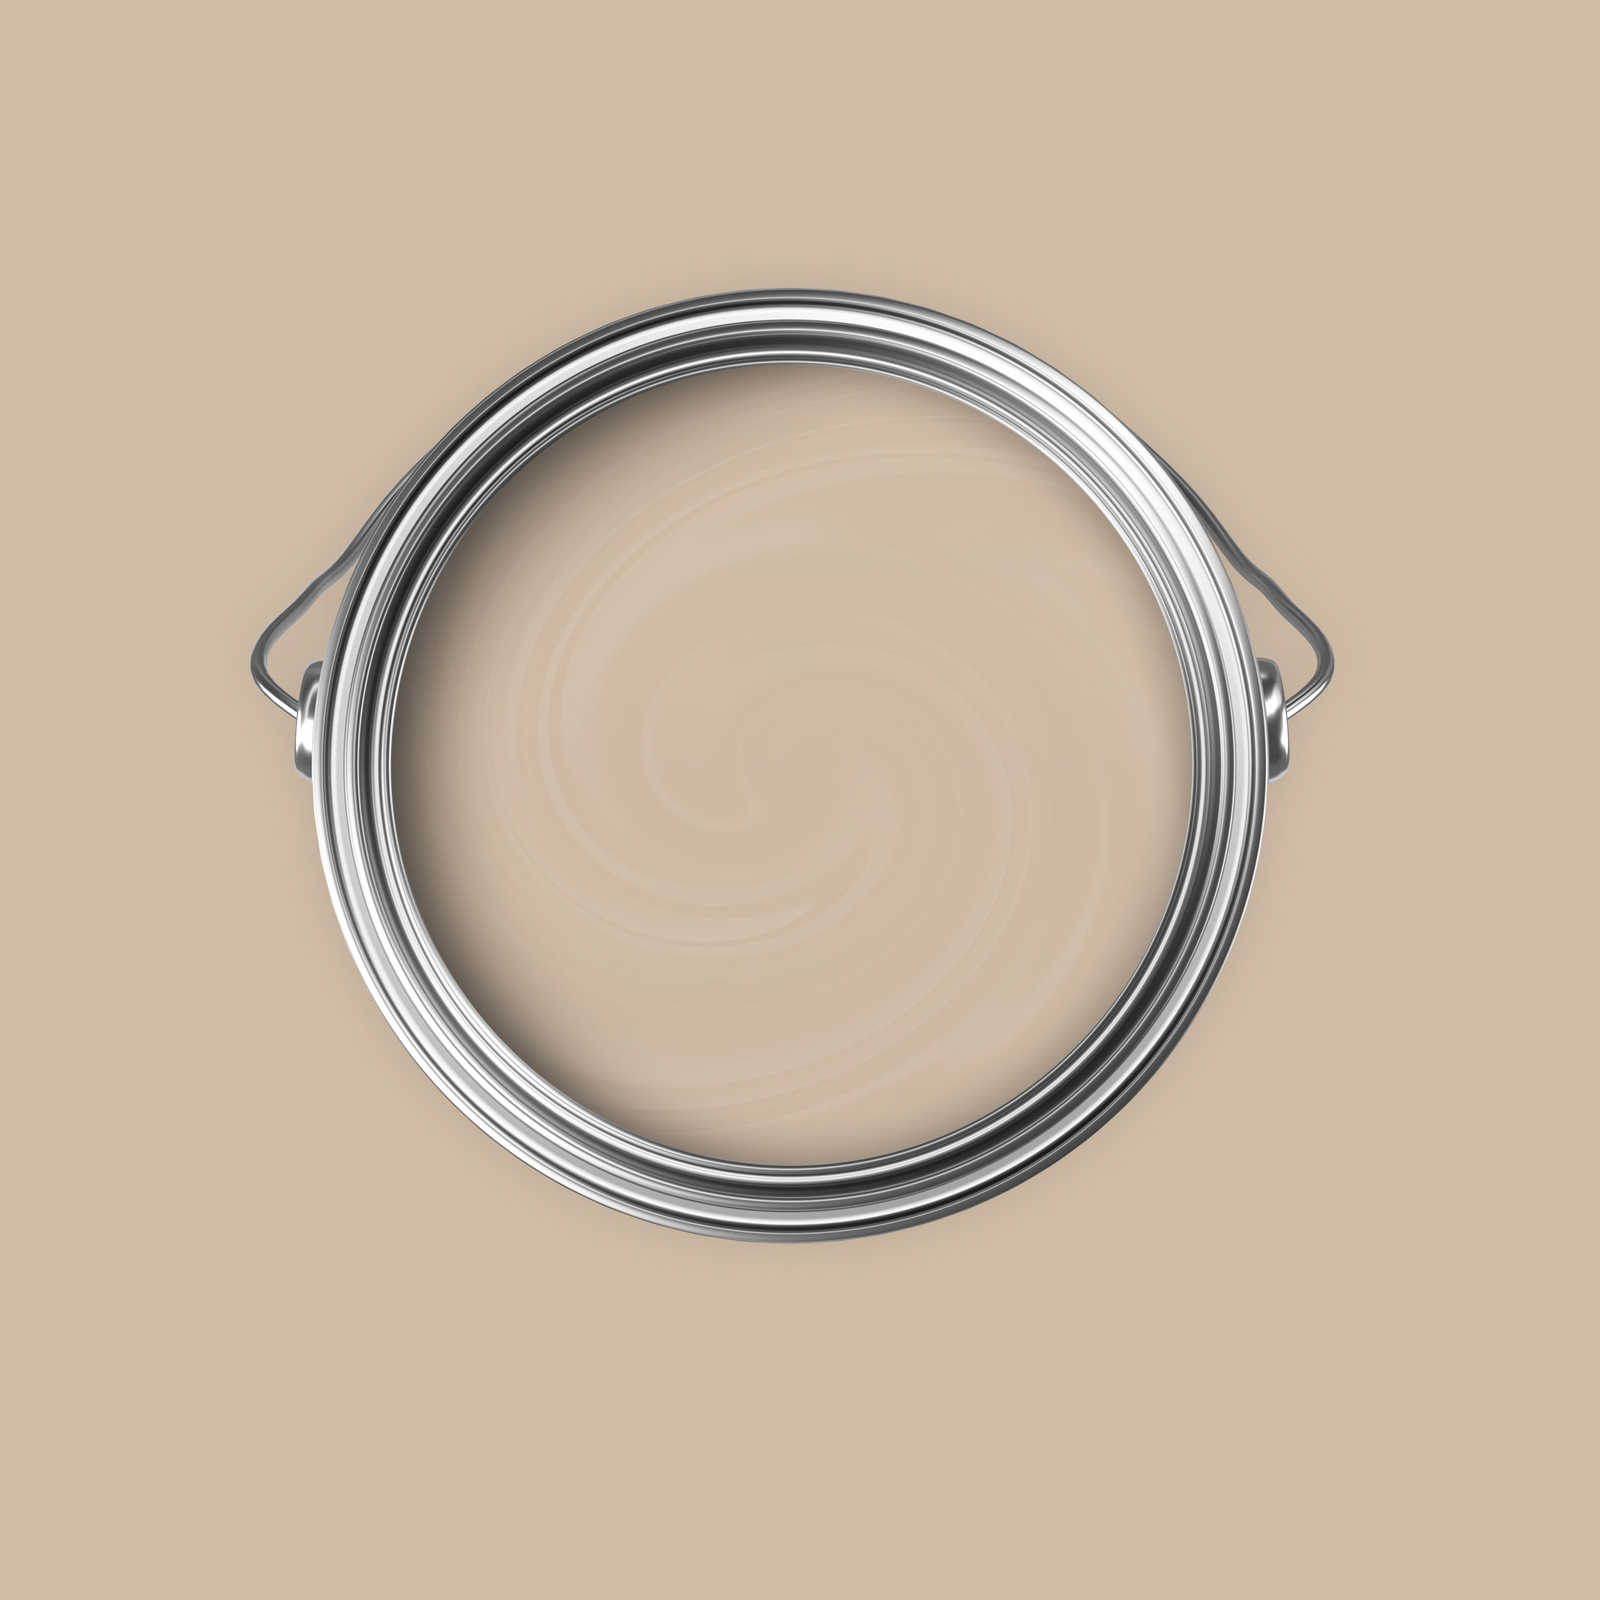             Premium Wall Paint homely light beige »Modern Mud« NW716 – 5 litre
        